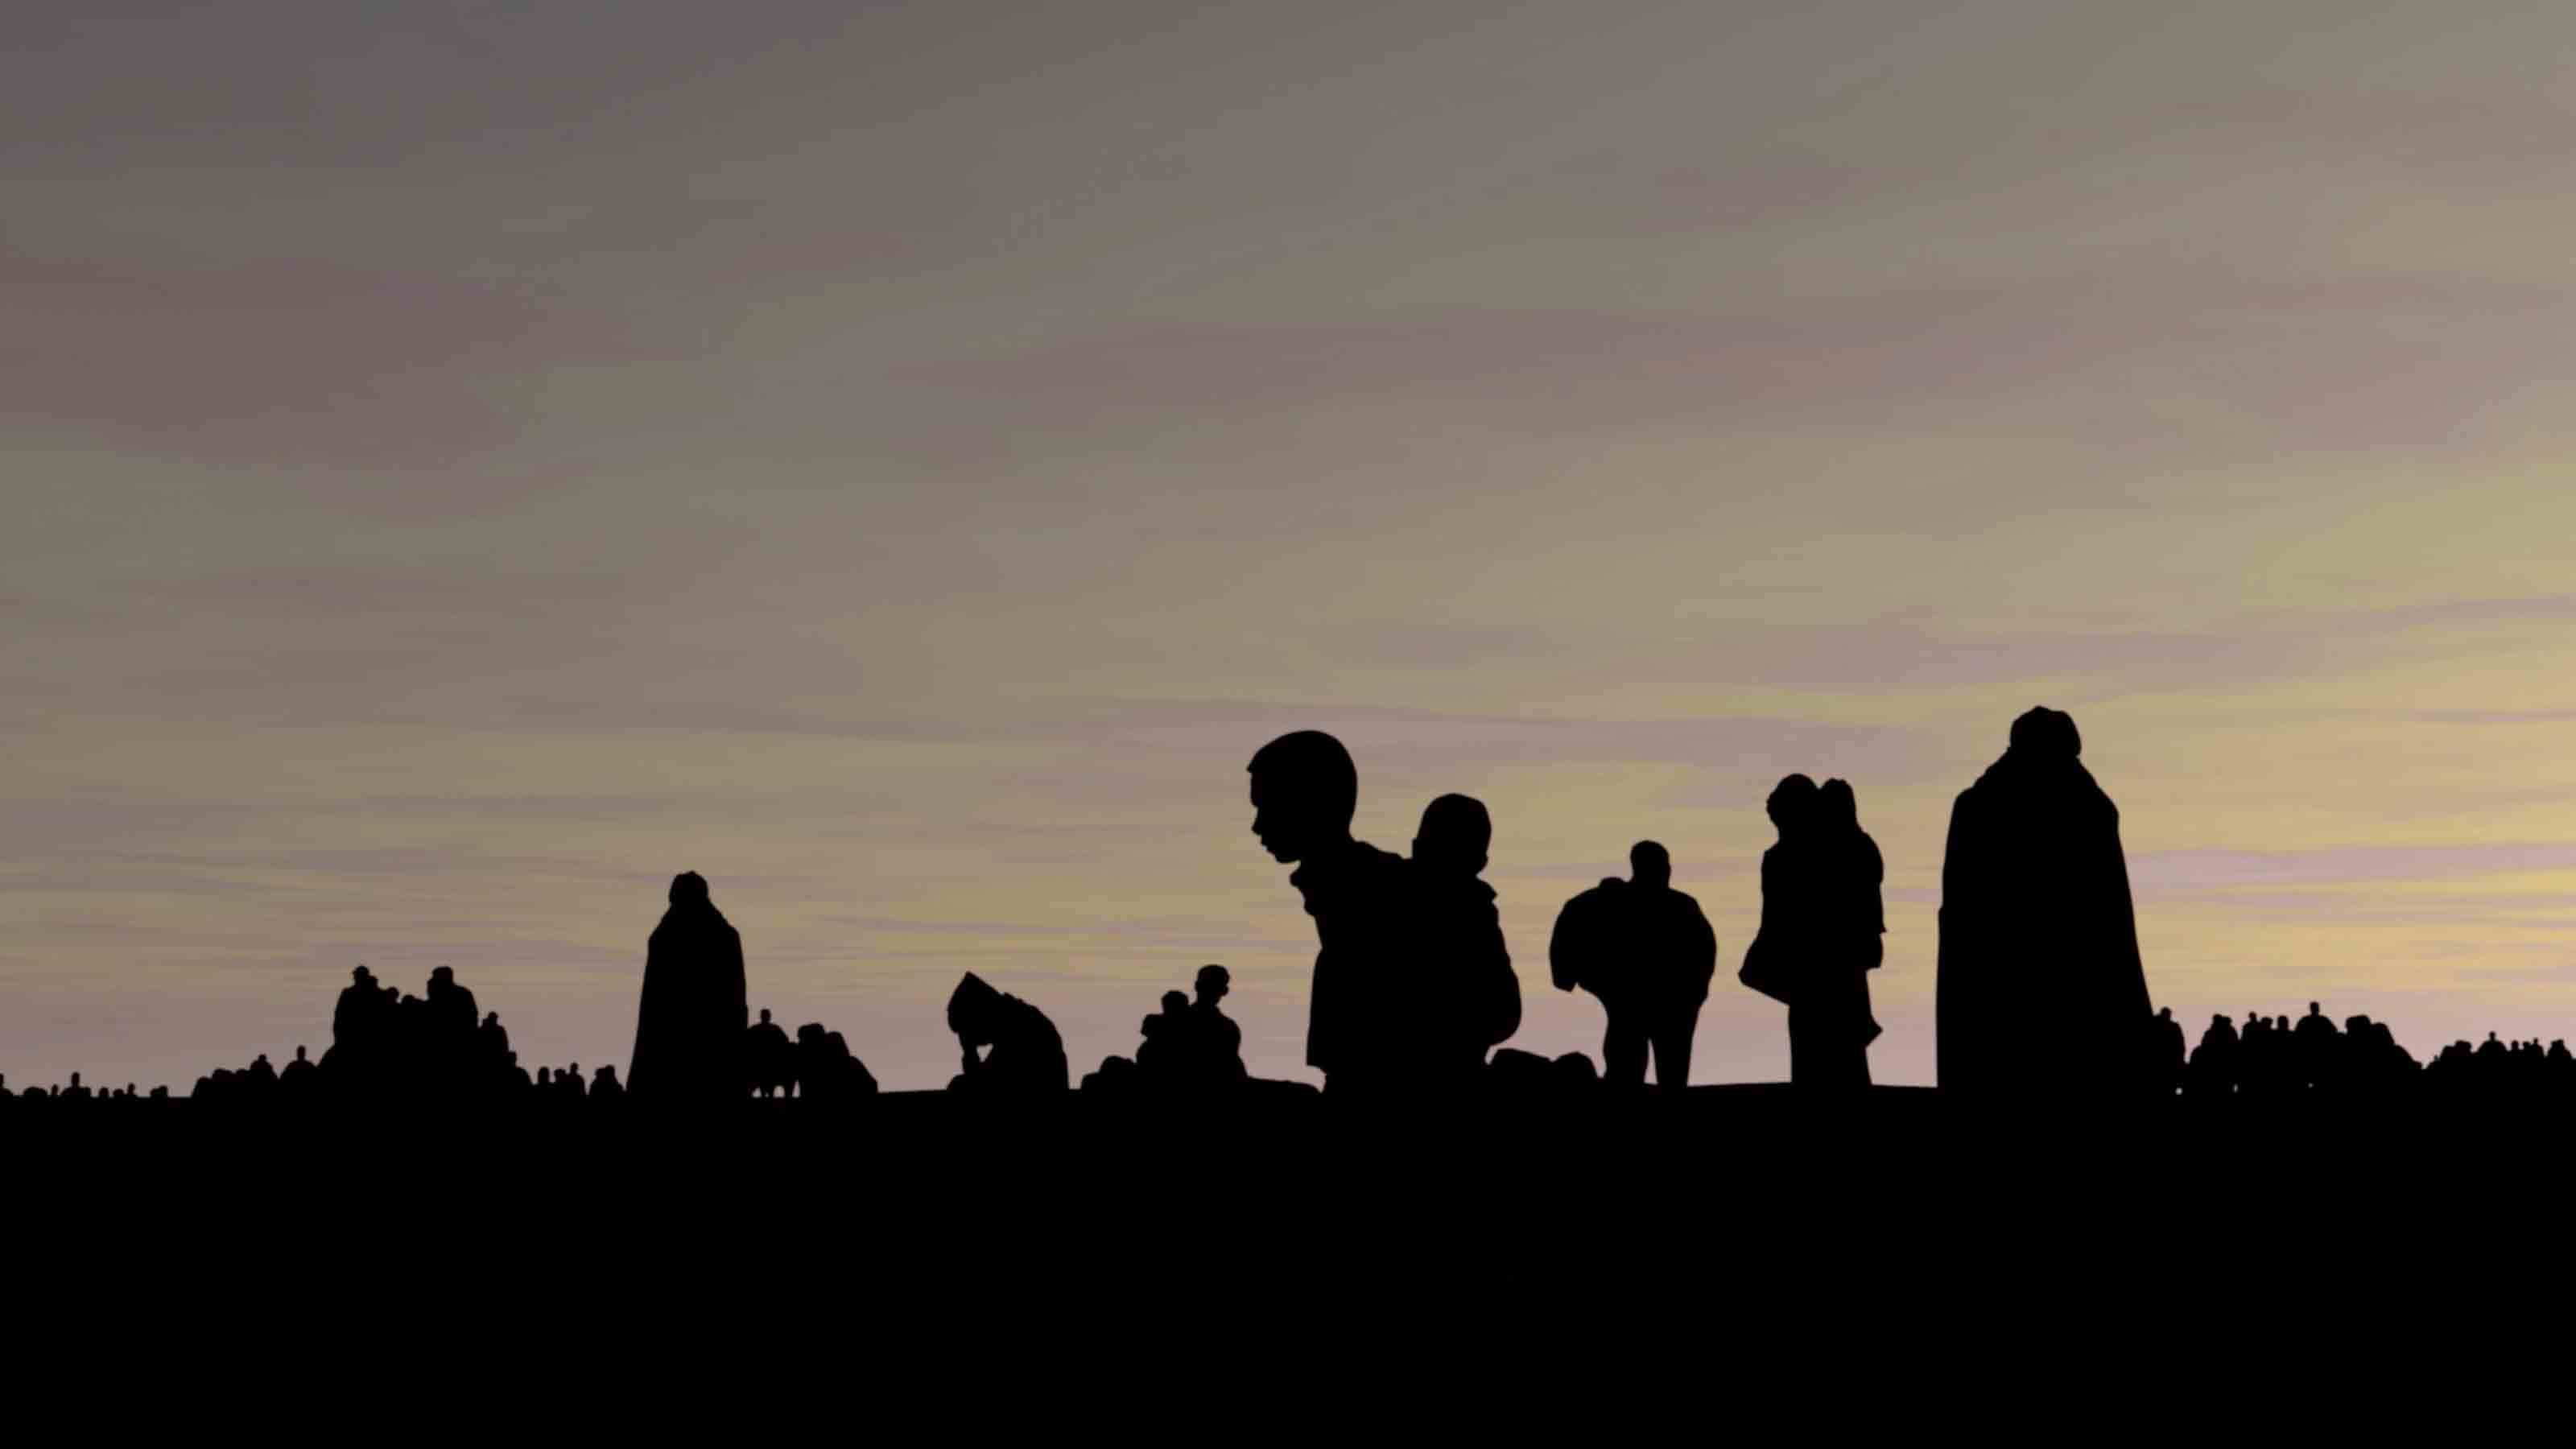 Silhouette of people